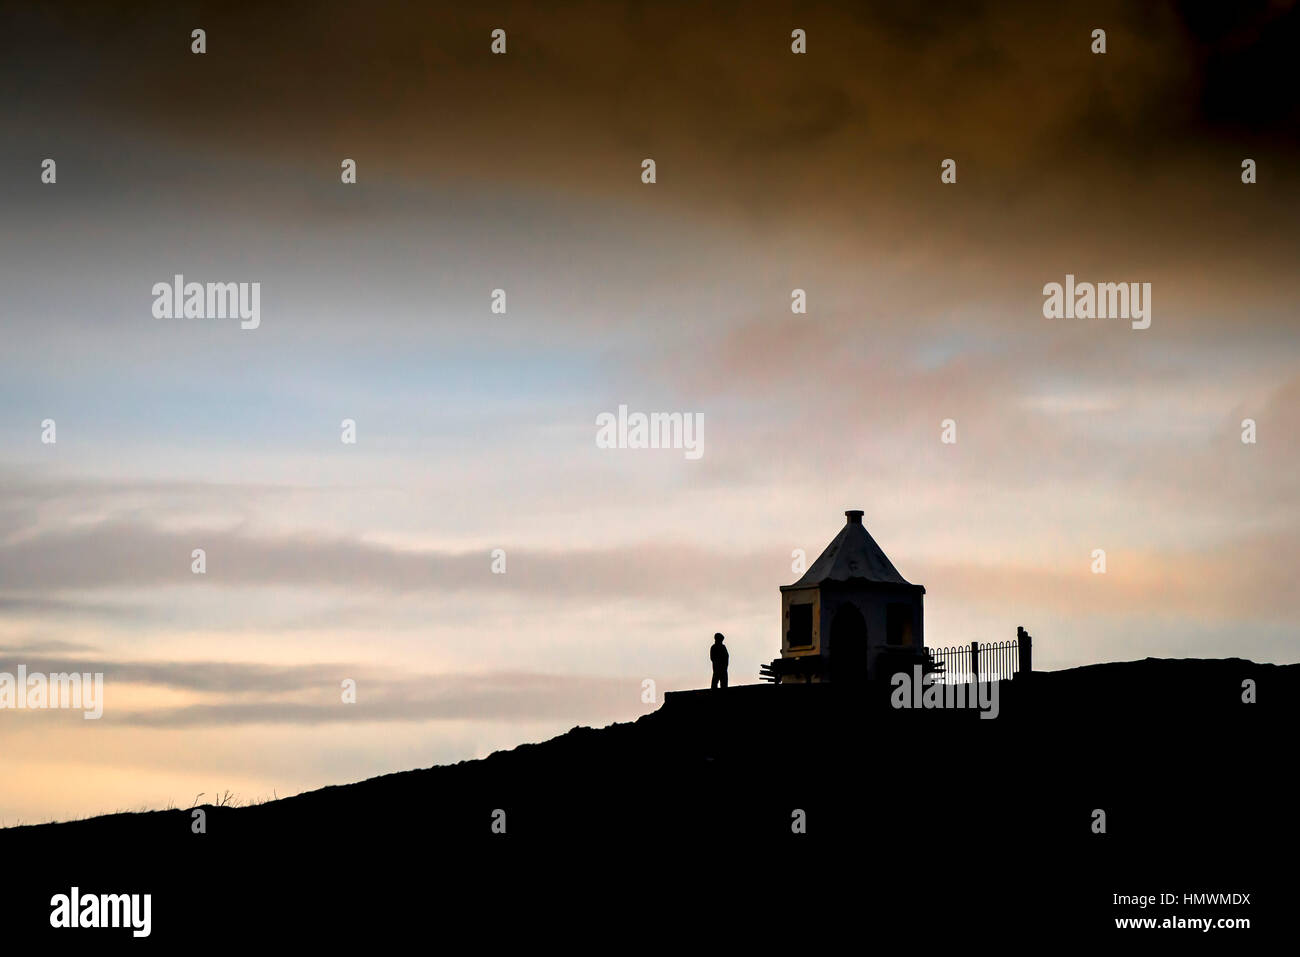 The silhouette of a person standing outside a small building at the top of Towan Headland in Newquay, Cornwall. Stock Photo